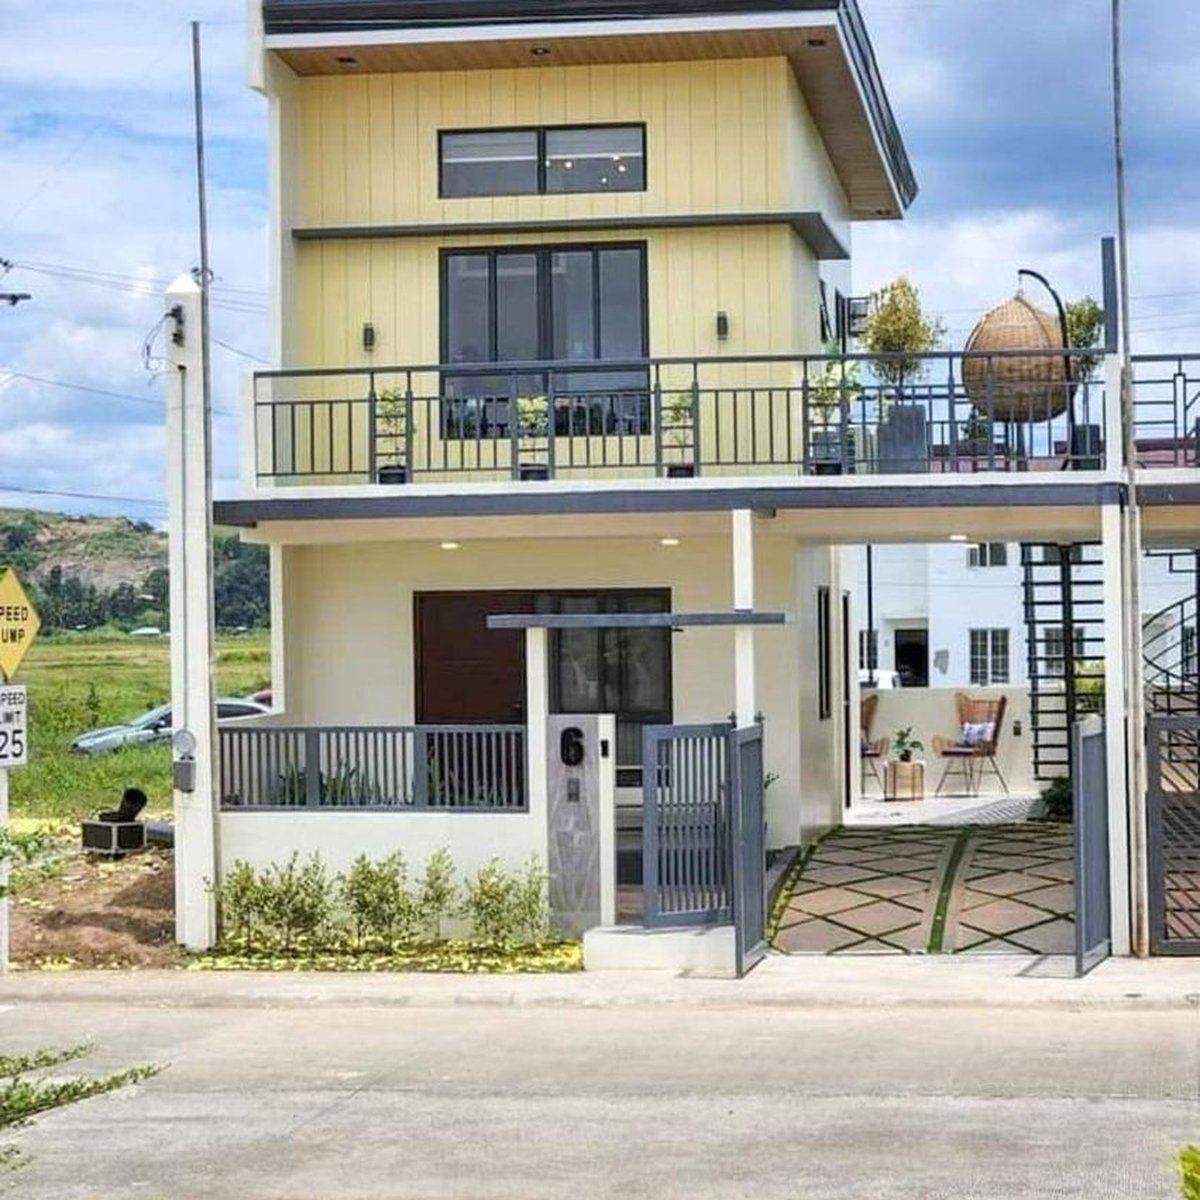 3-bedroom Single Attached House For Sale in Cagayan de Oro